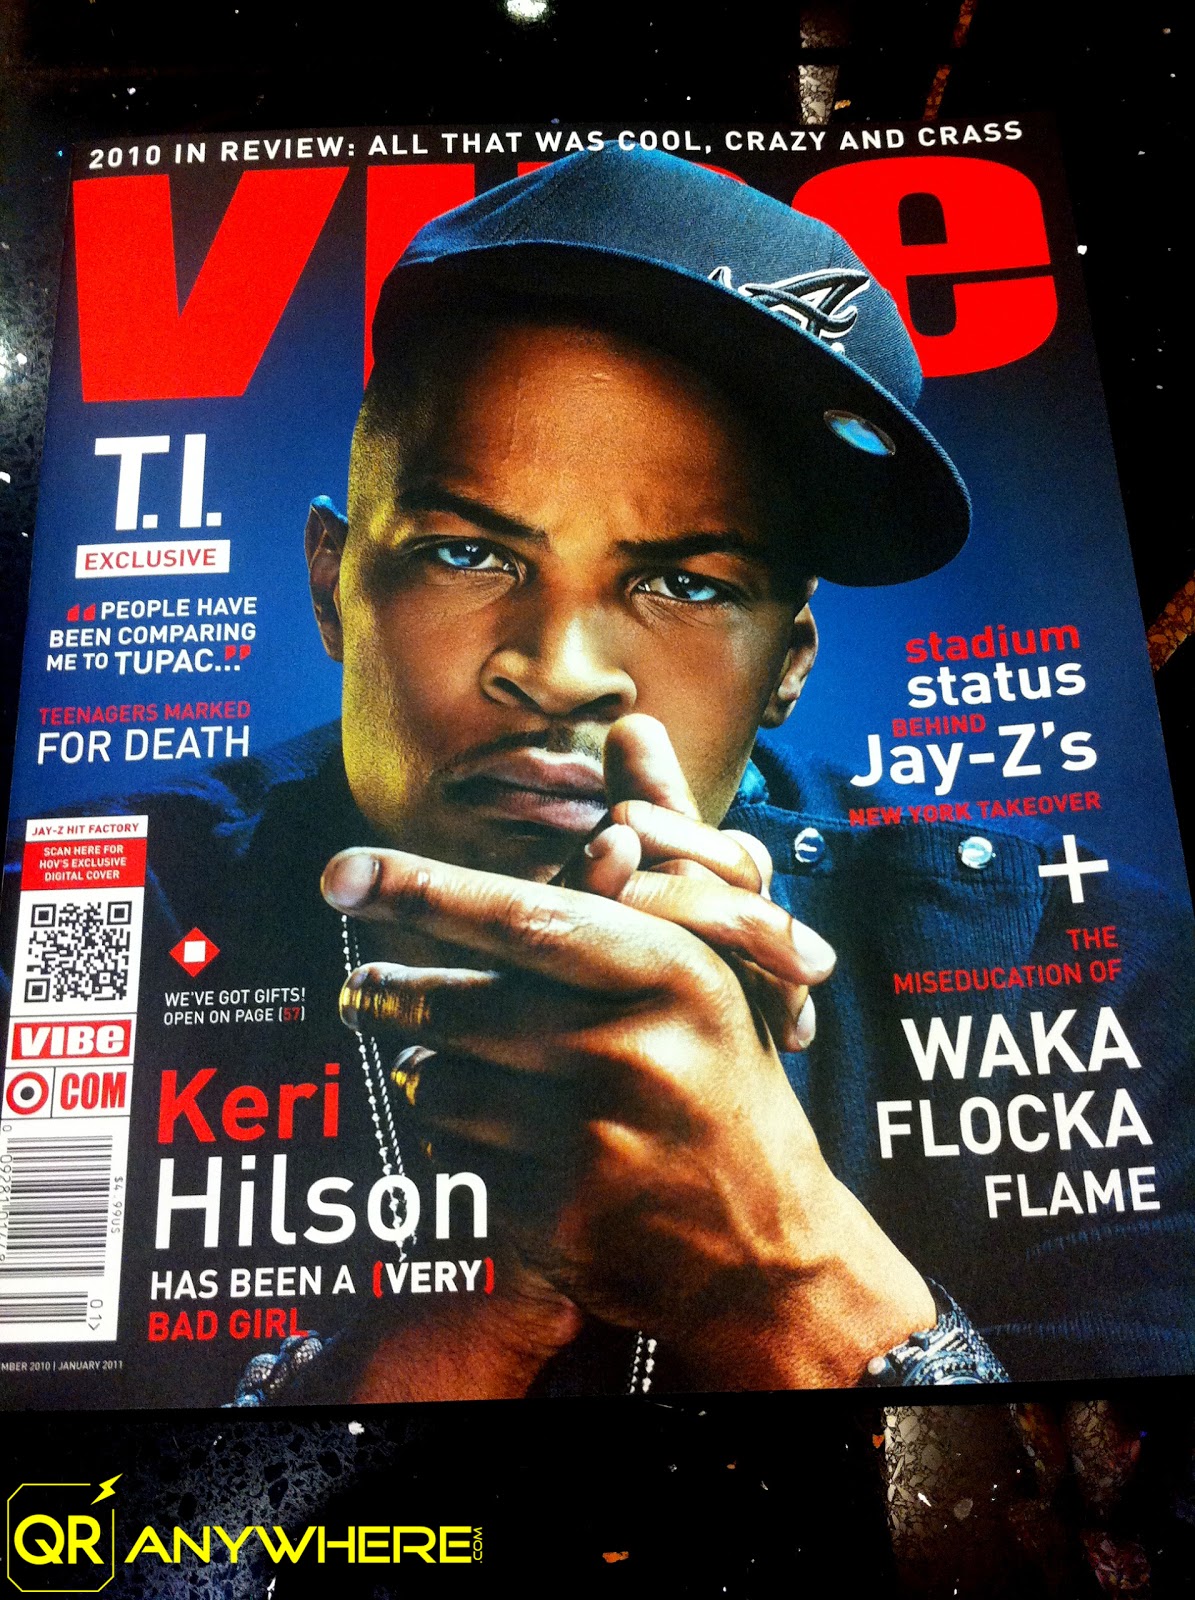 QR Codes Anywhere: VIBE Magazine QR Code Cover Doesn't Scan